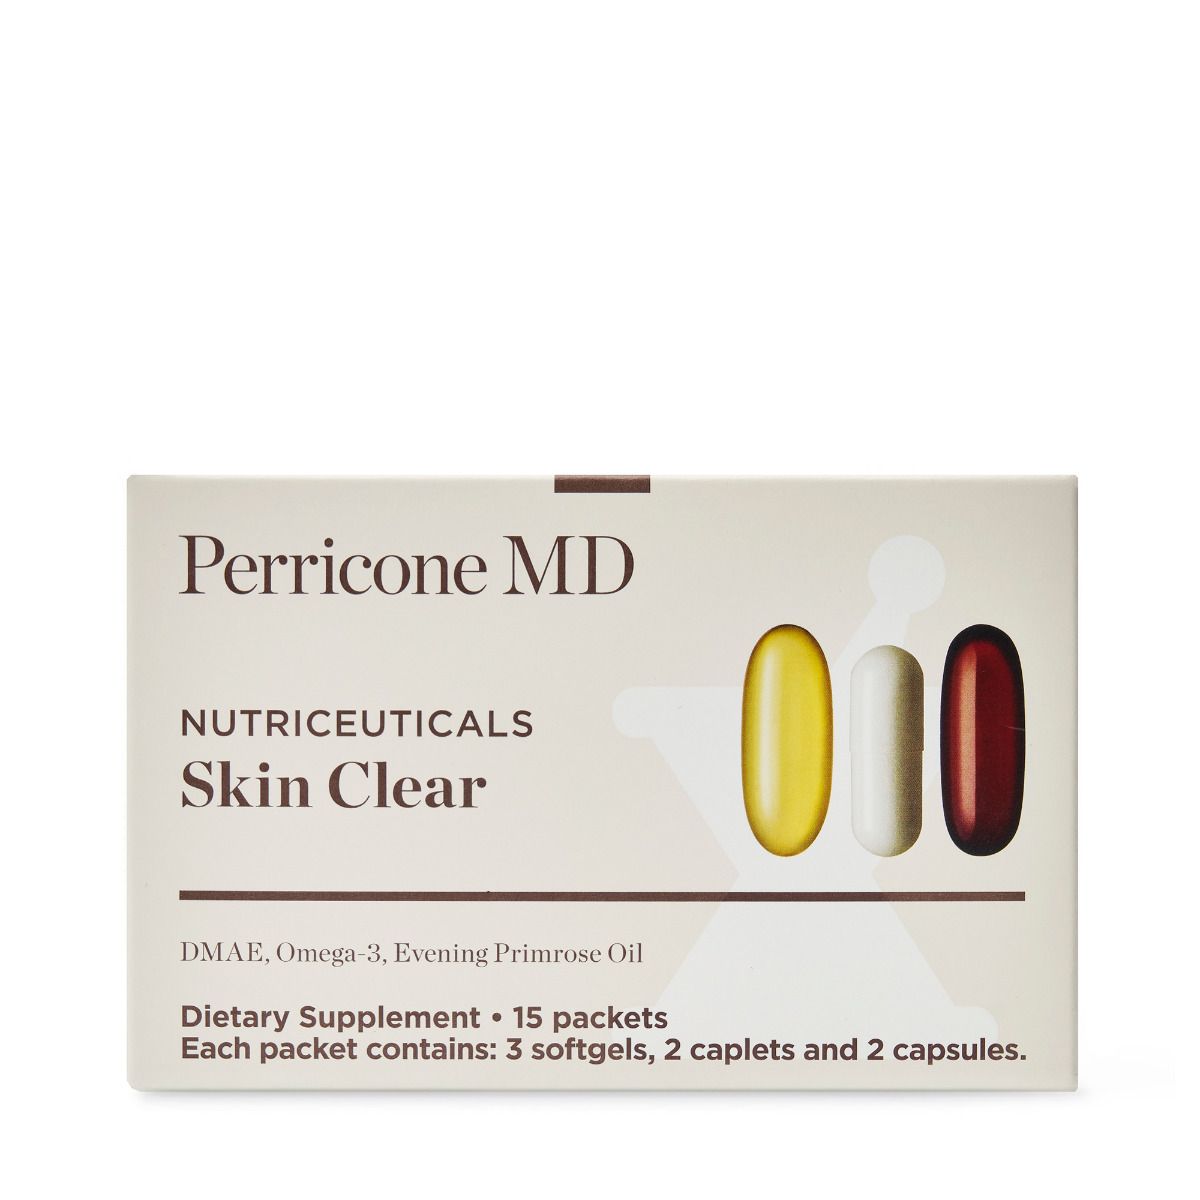 Perricone MD Skin Clear Supplements